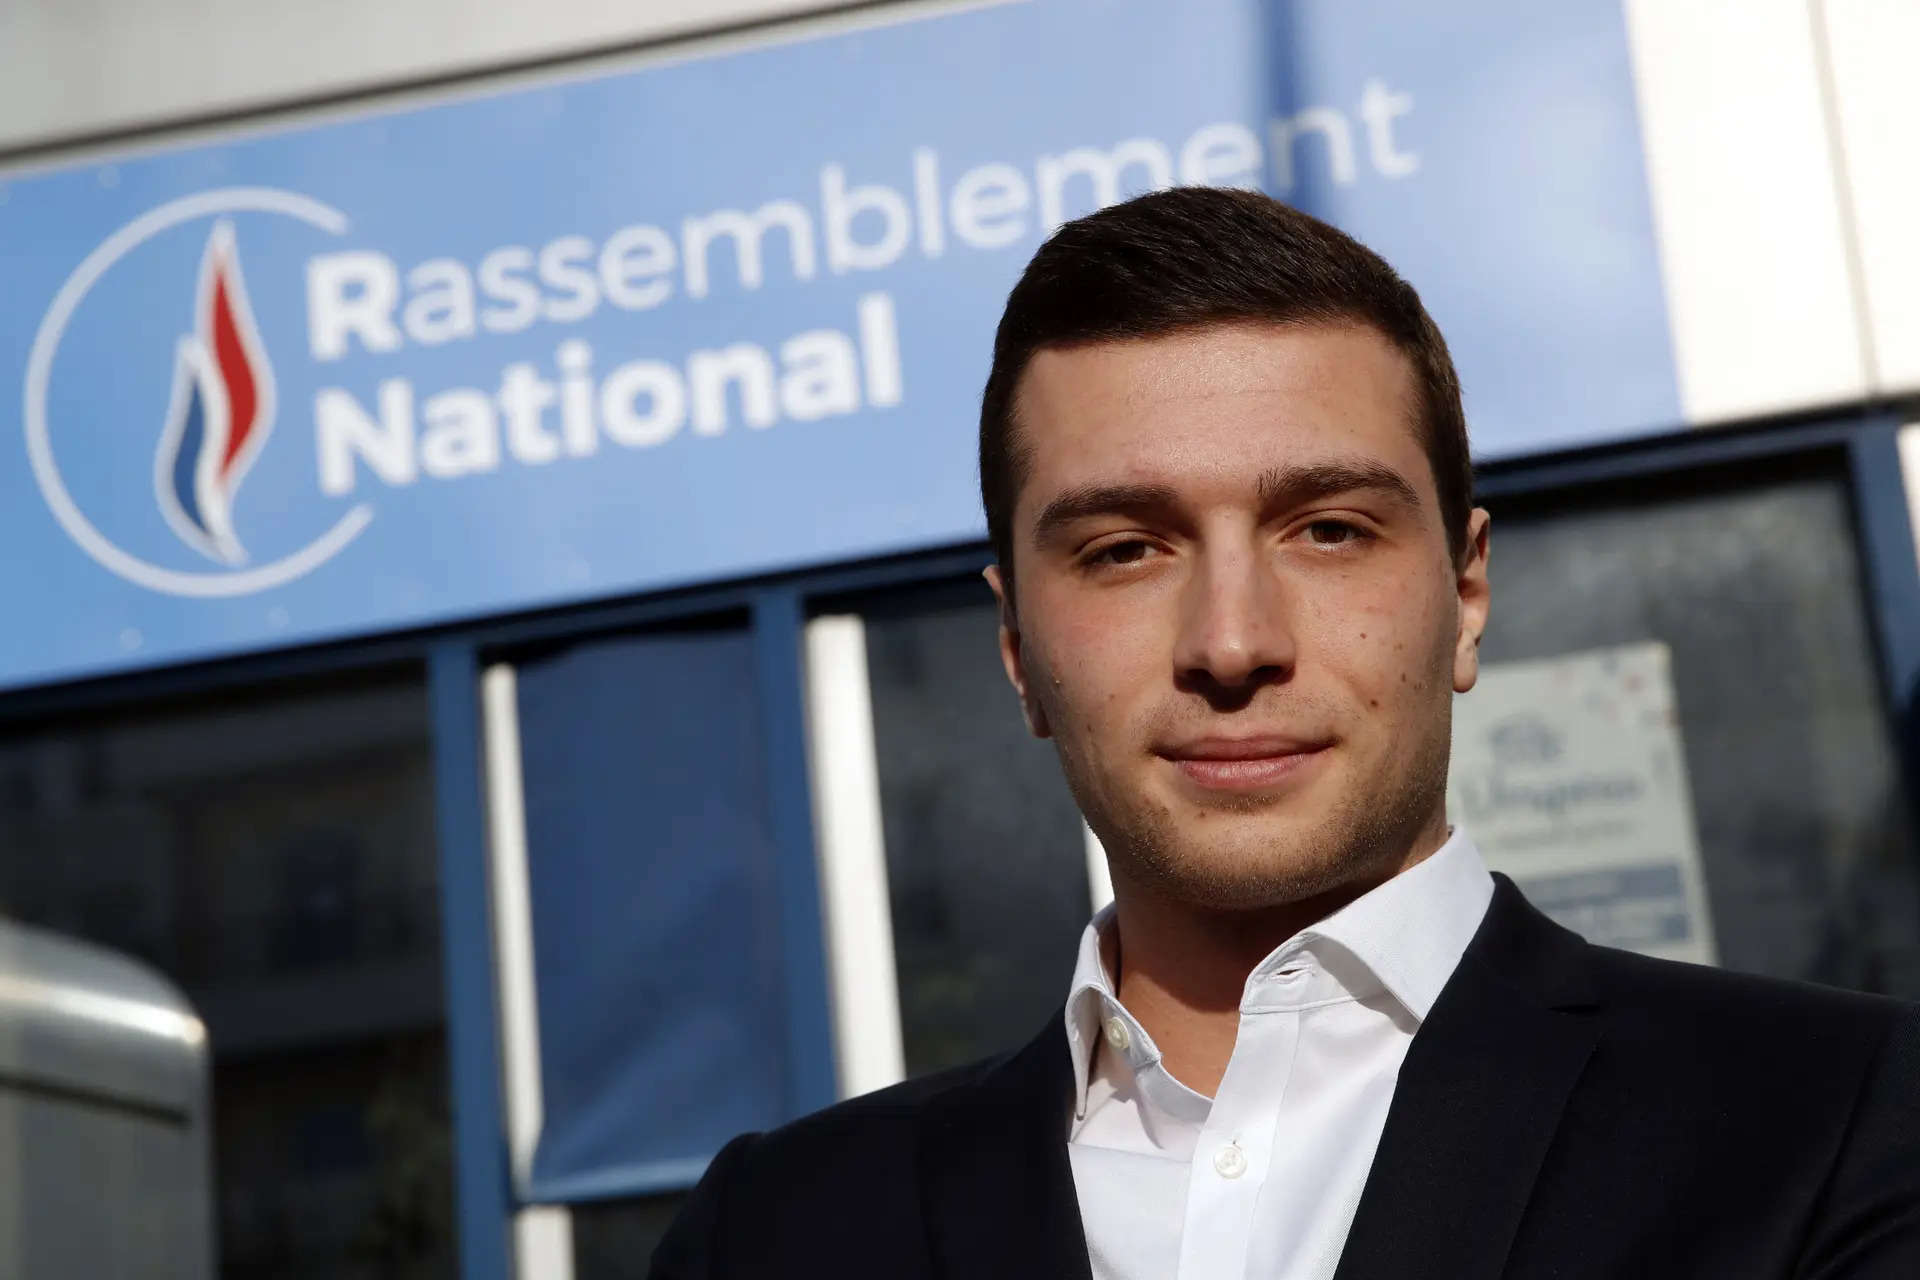 At 28, Bardella could become youngest French prime minister at helm of far-right National Rally 